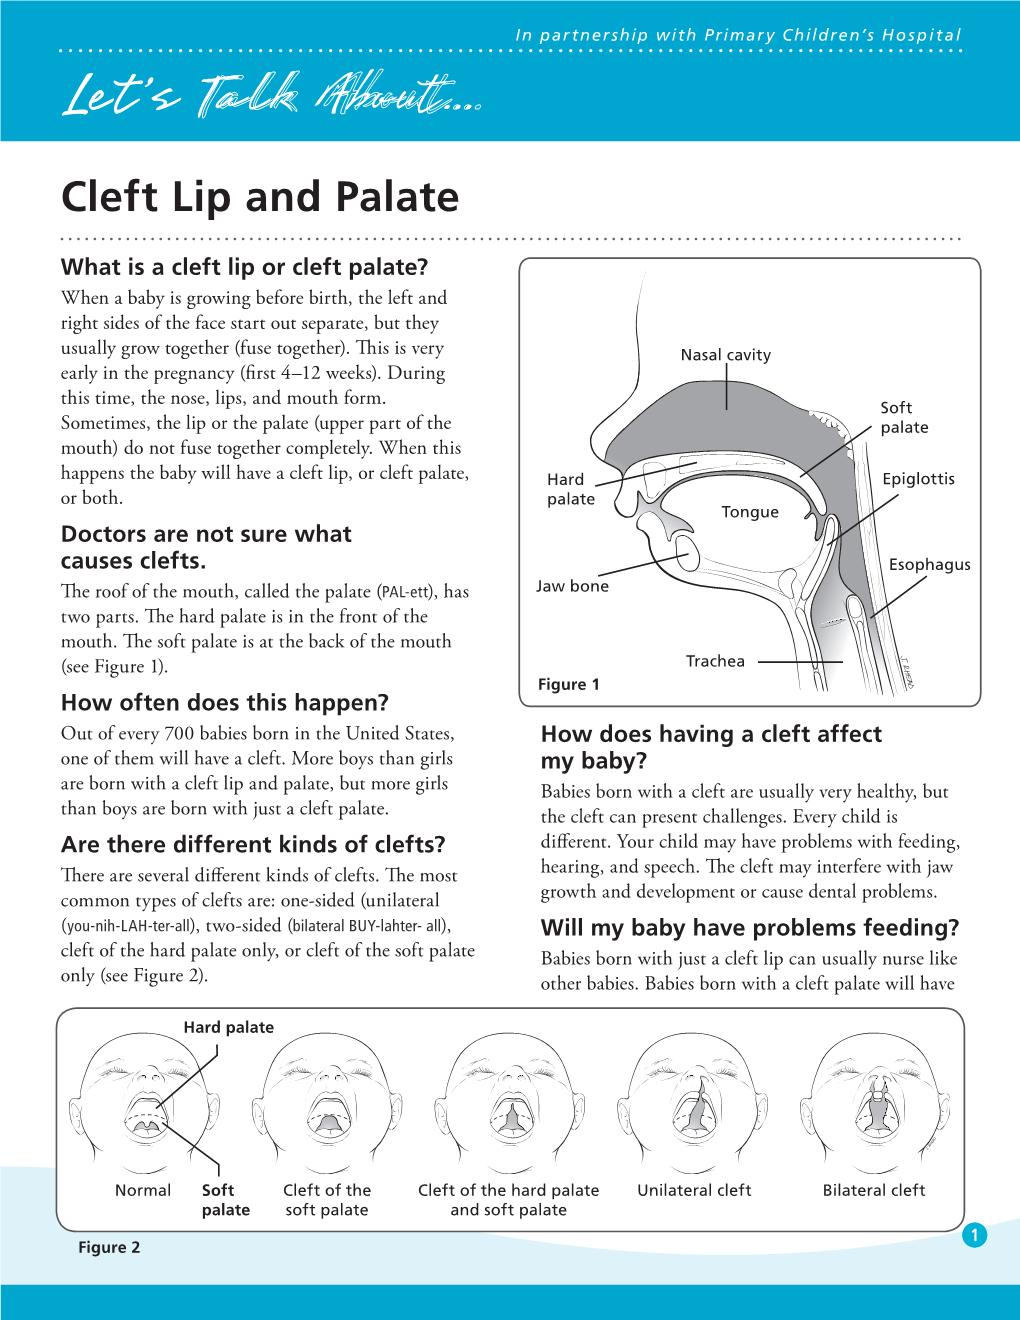 Cleft Lip and Palate (Let's Talk About... Pediatric